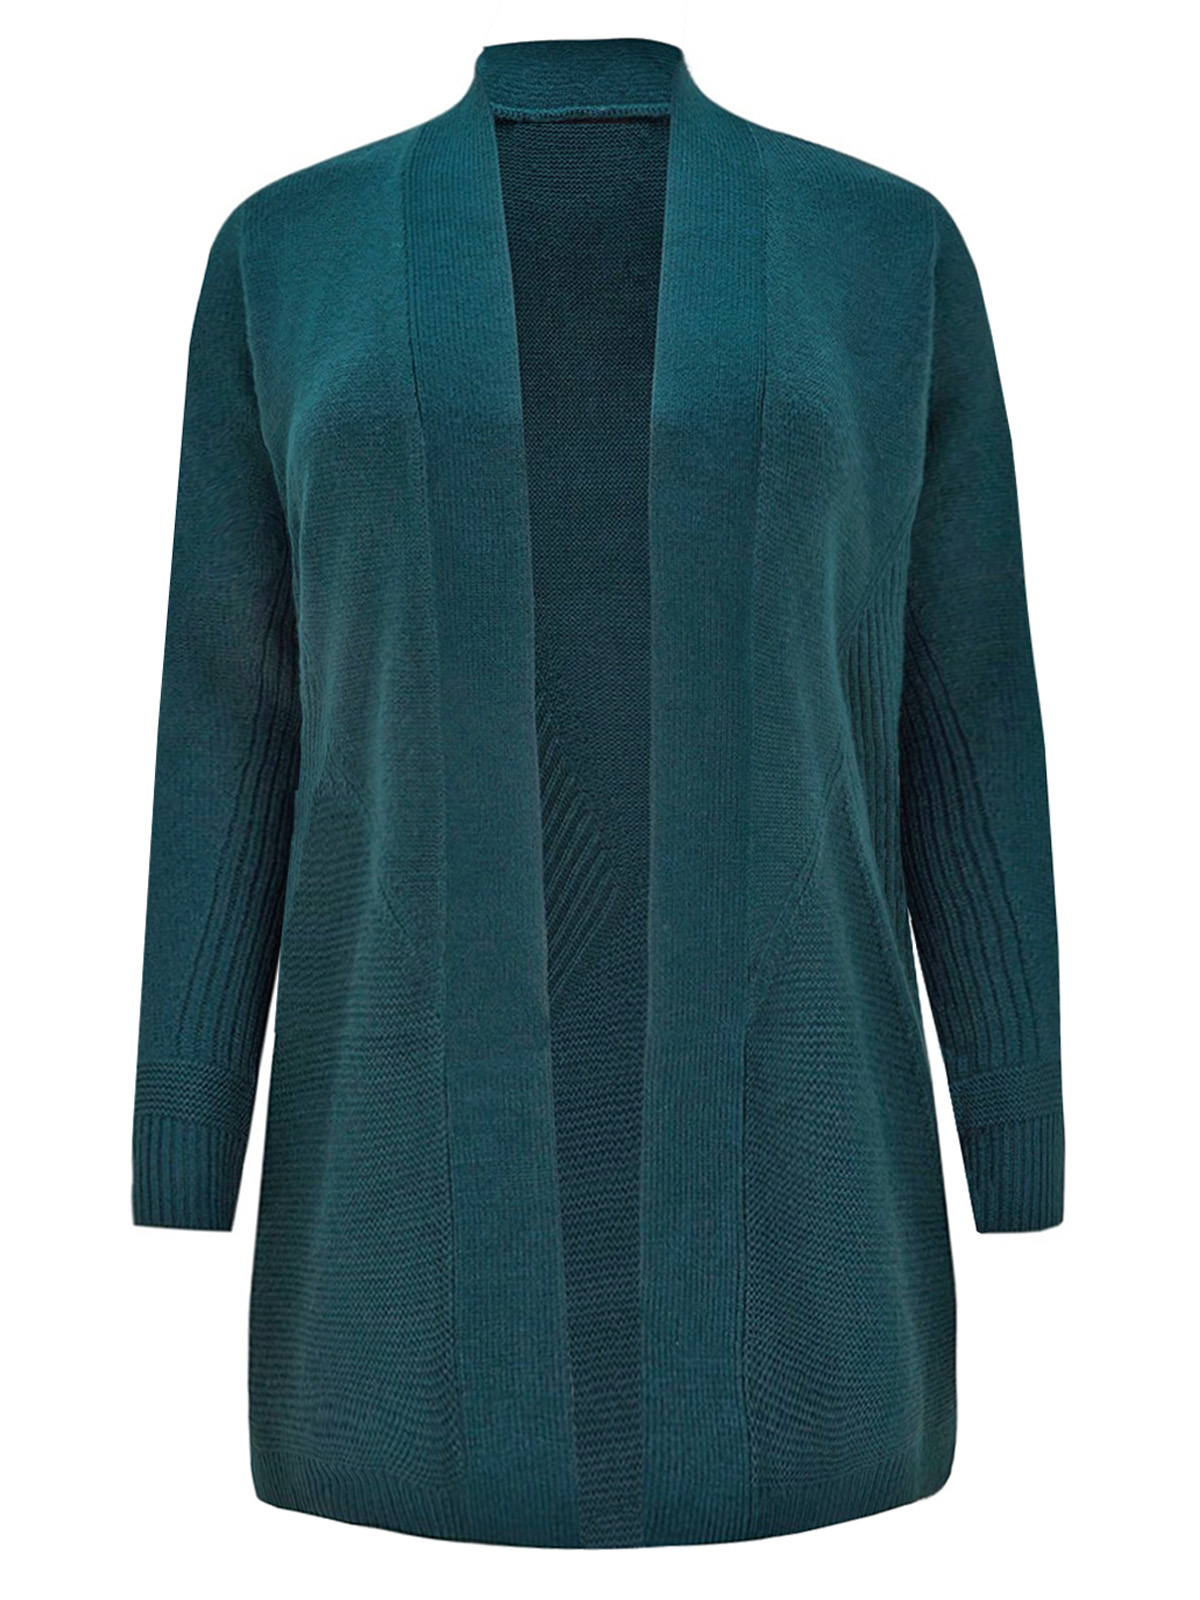 3VANS GREEN Open Front Ribbed Cardigan - Plus Size 14 to 30/32